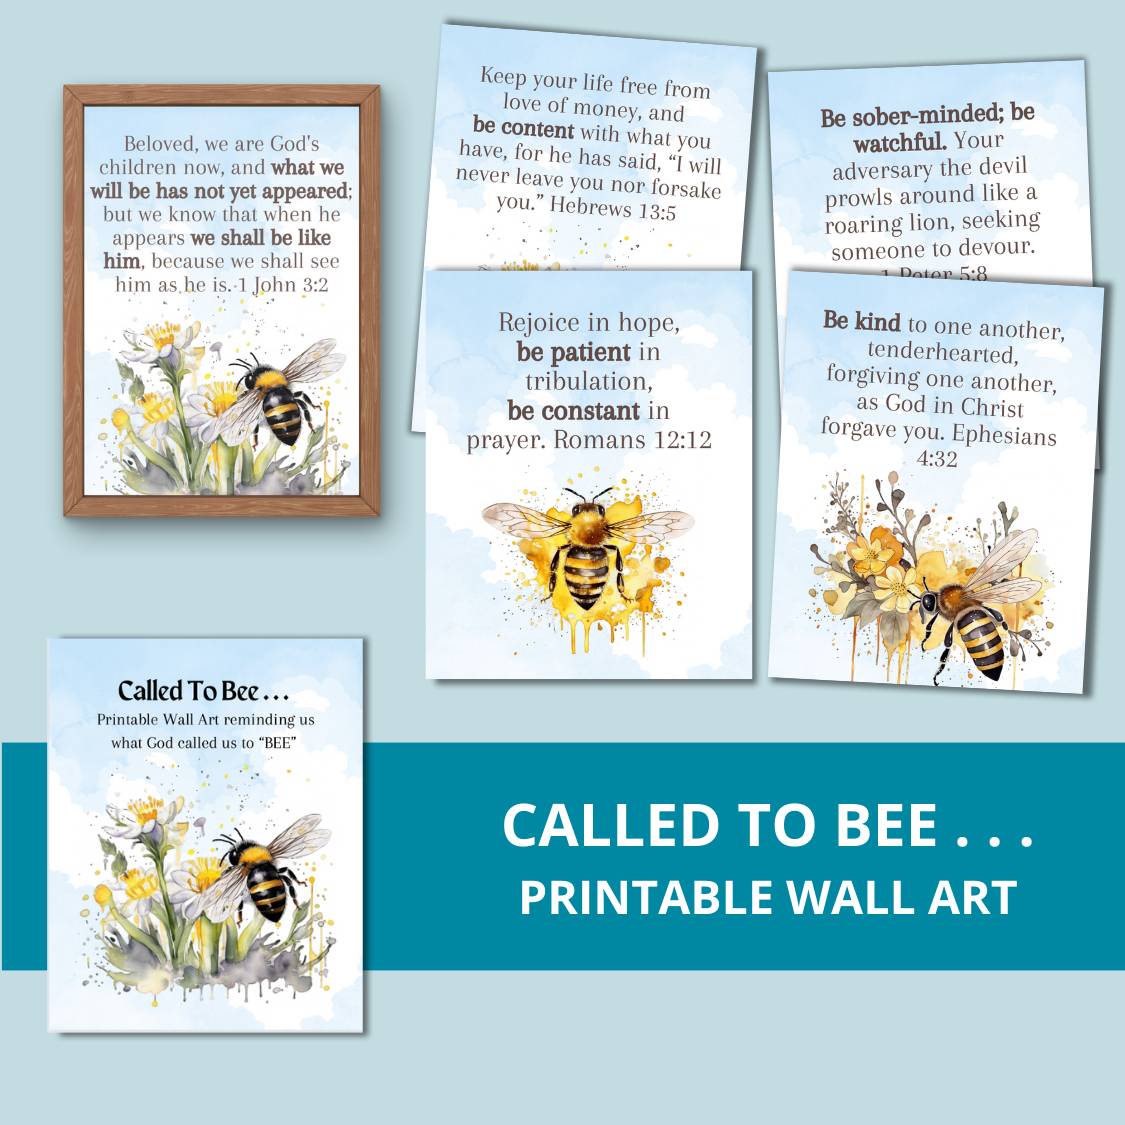 Called to Bee . . . Printable Scripture Wall Decor